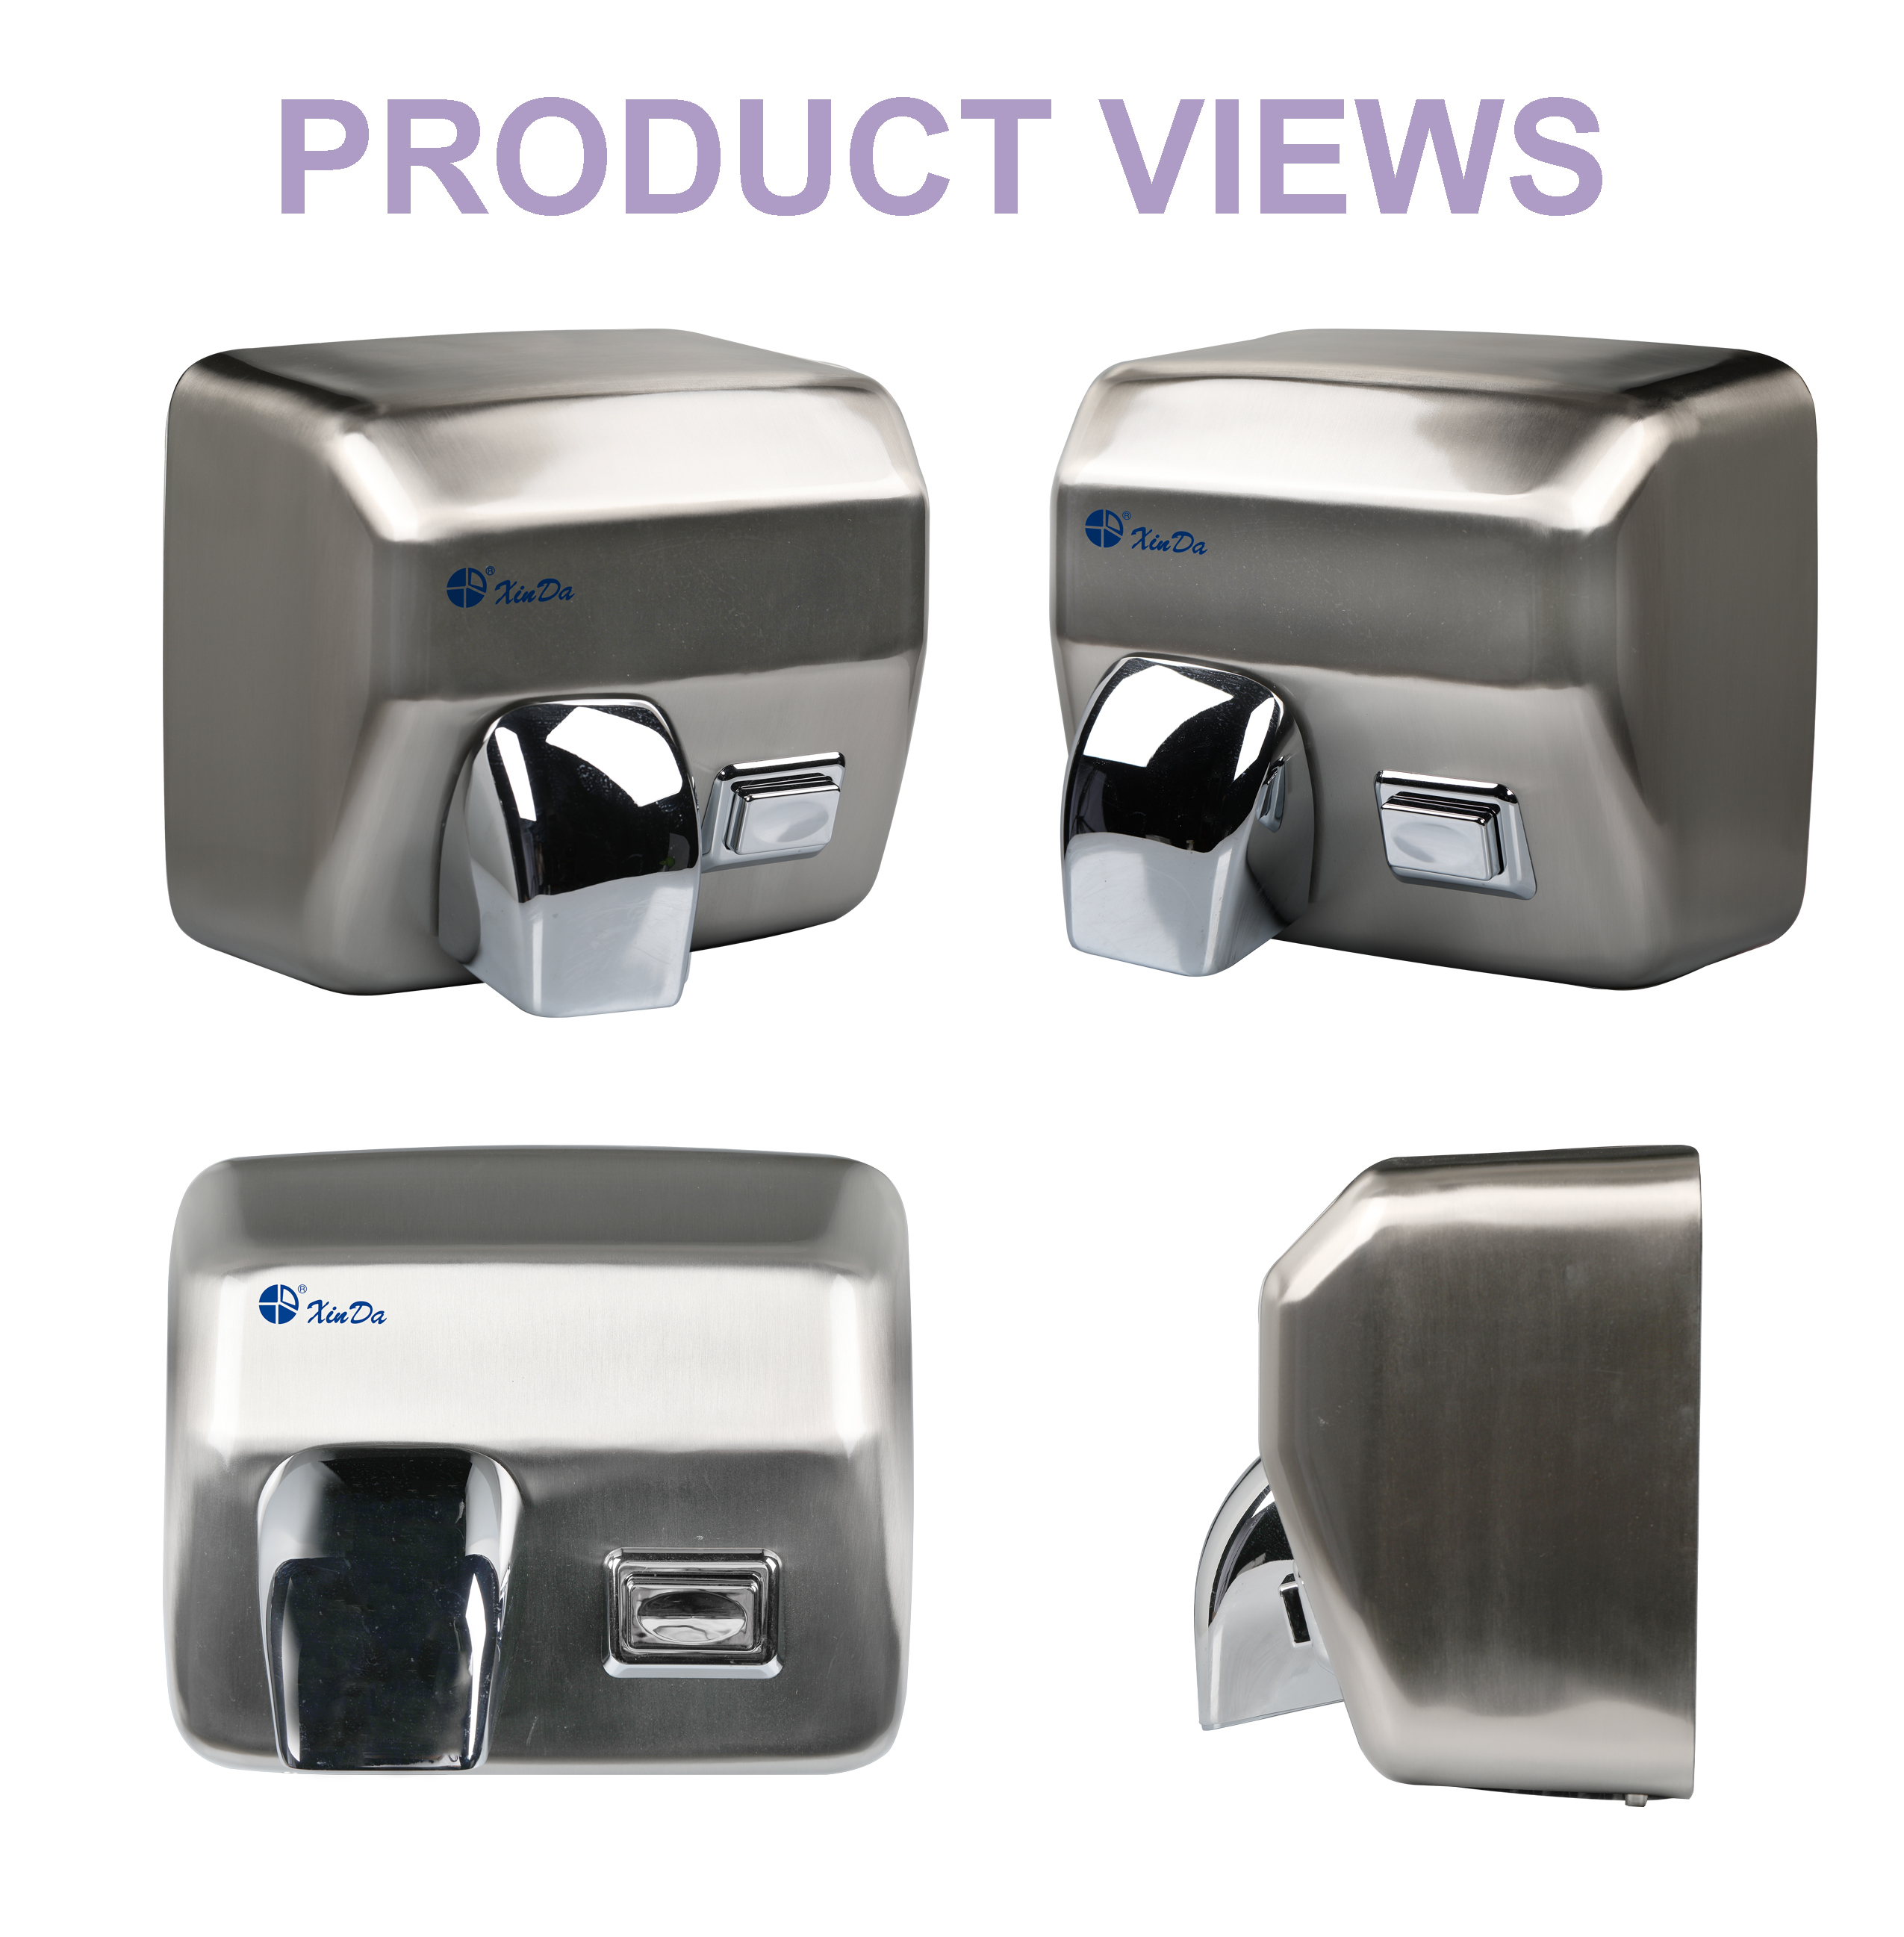 Silver Wall-mounted Public Bathroom Hospital Toilet Hotel Accessories Commercia Hight-speed Hand Drier